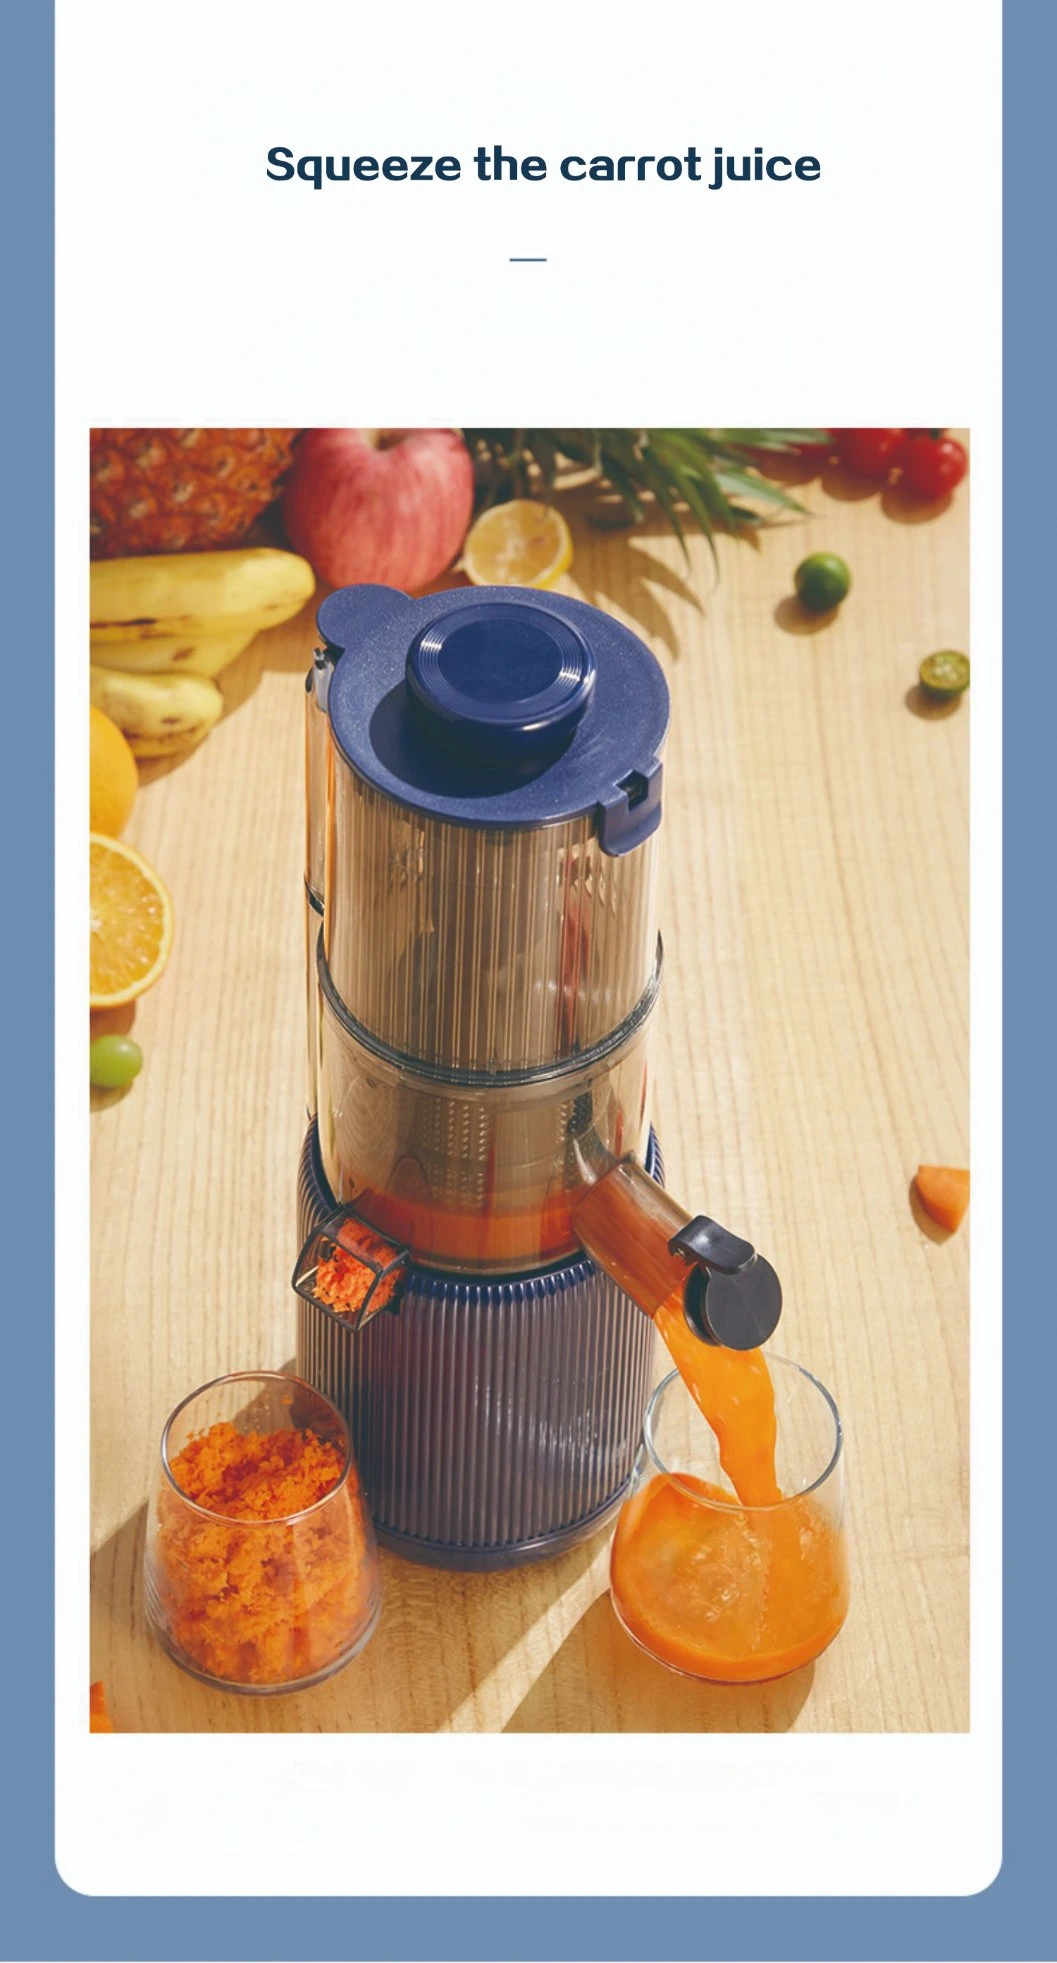 200W Slow Juicer Plasitc Shell New Appearance Design 90mm Wide Chute Juicer